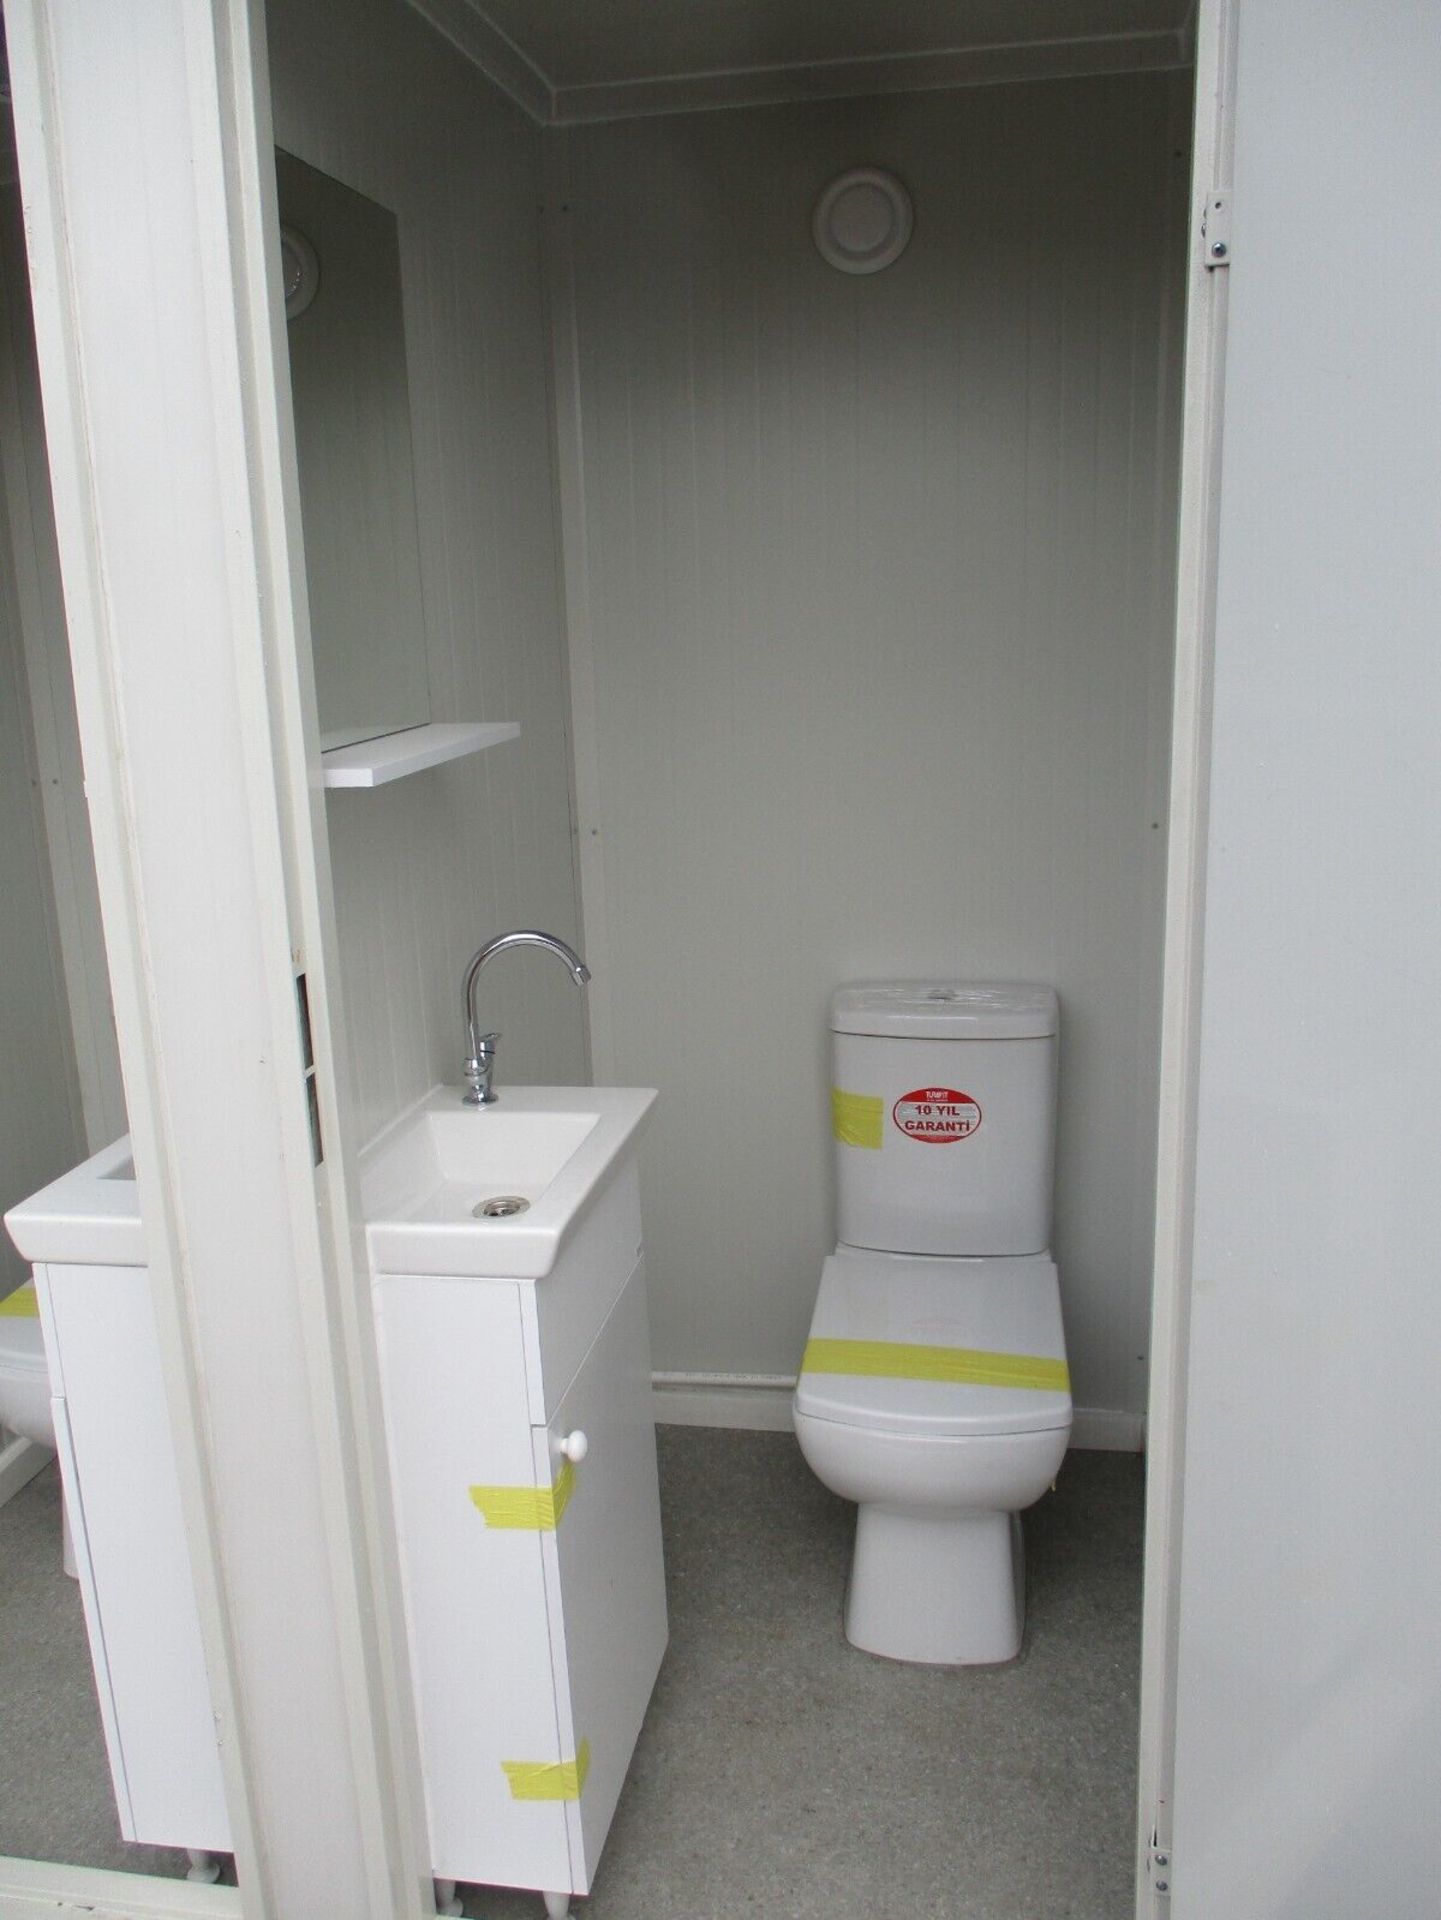 2.15M X 1.3M SHIPPING CONTAINER TOILET BLOCK - Image 5 of 8